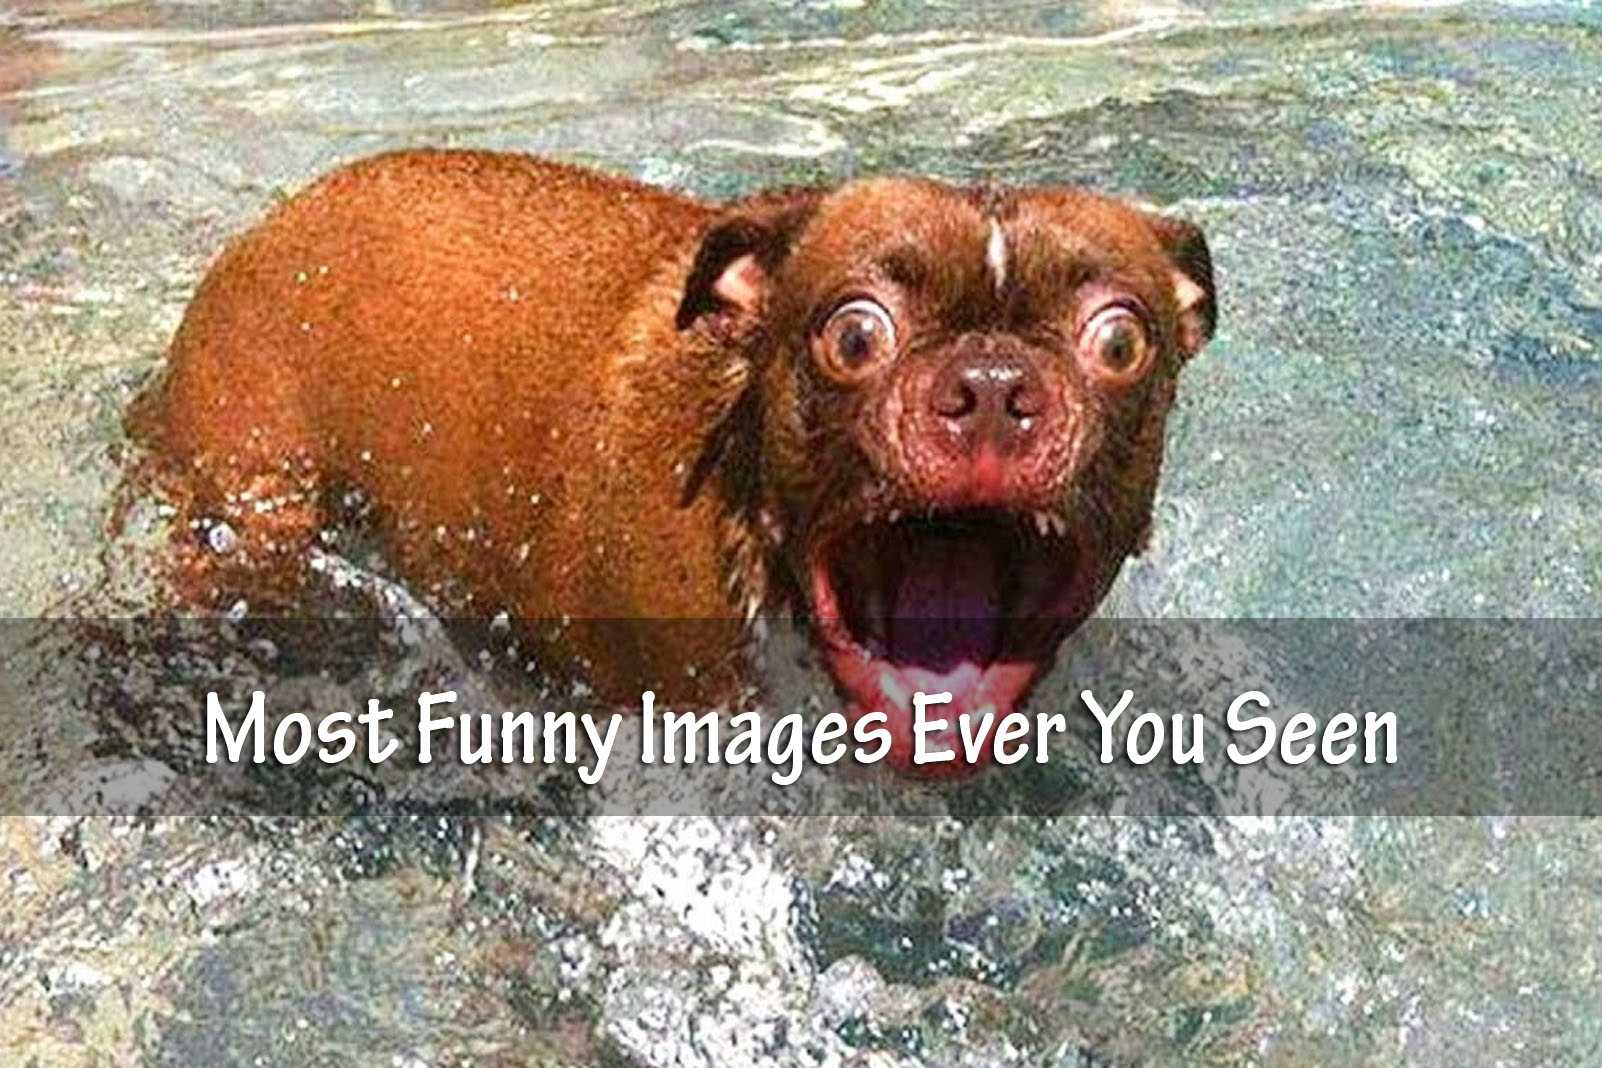 21 Most Funny Images Ever You Seen - List Bark